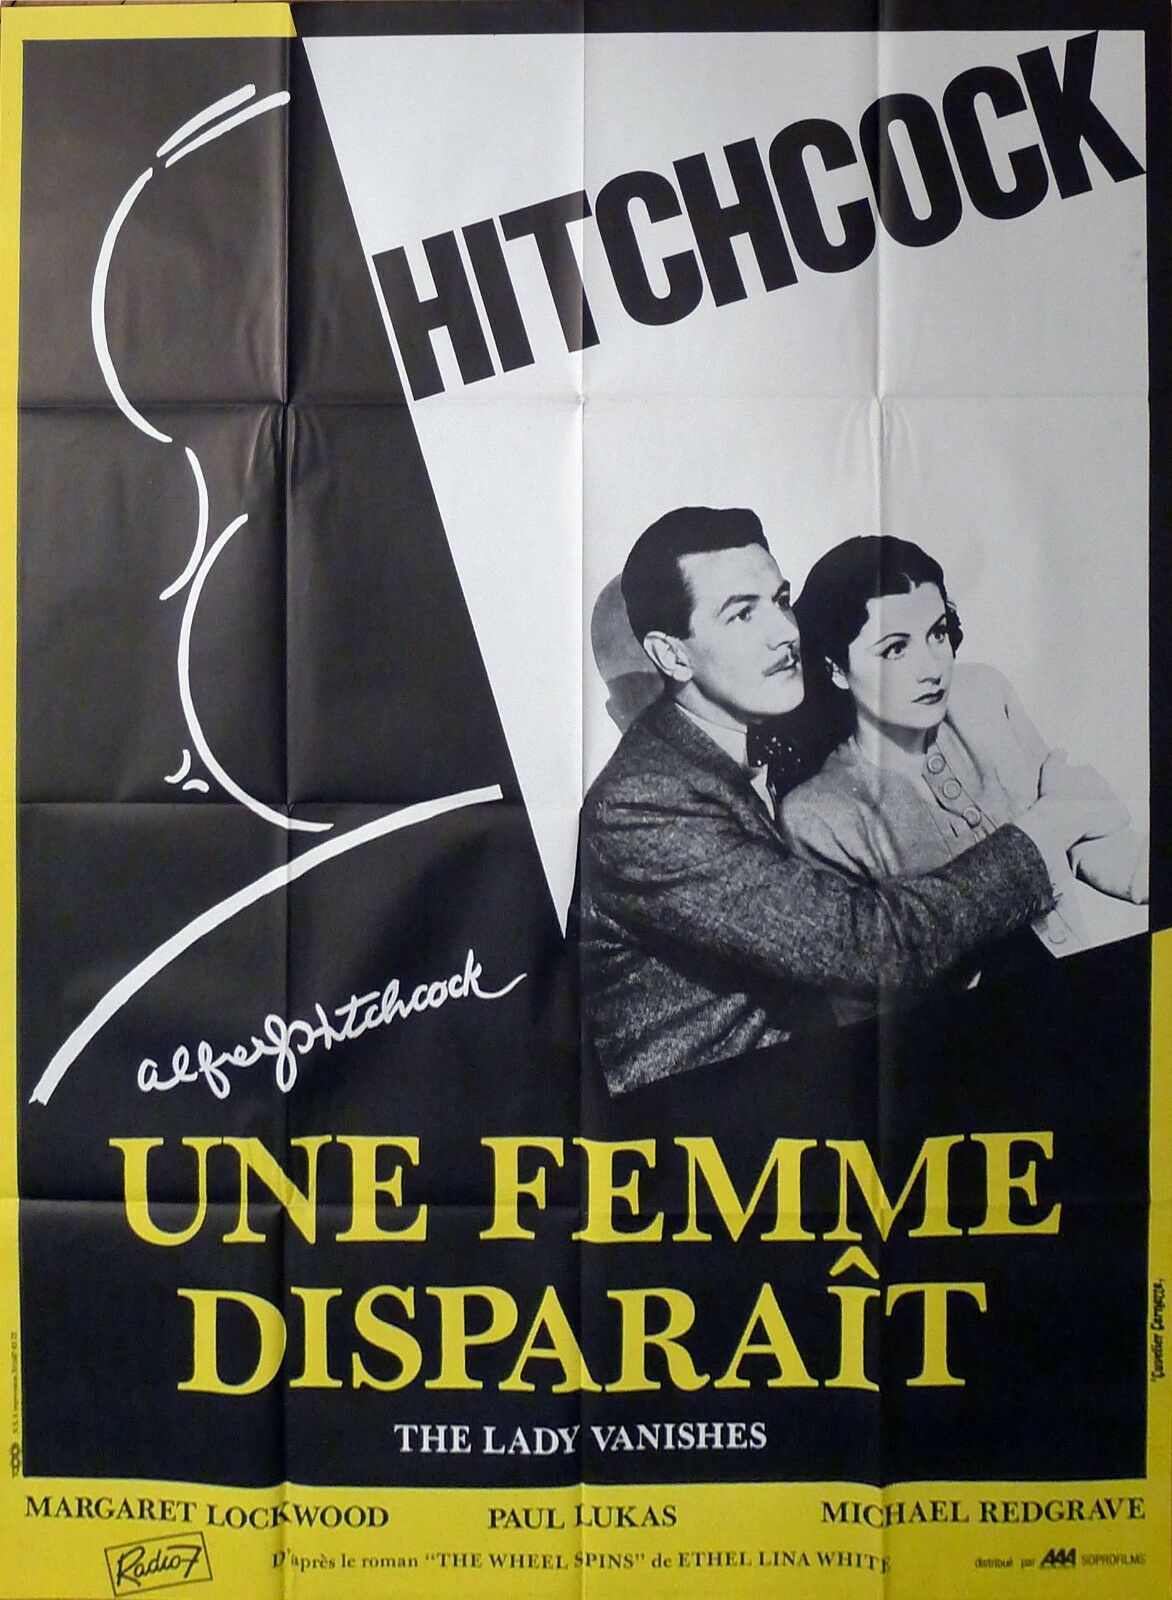 The Lady Vanishes - Hitchcock - Reissue Large French Movie Poster